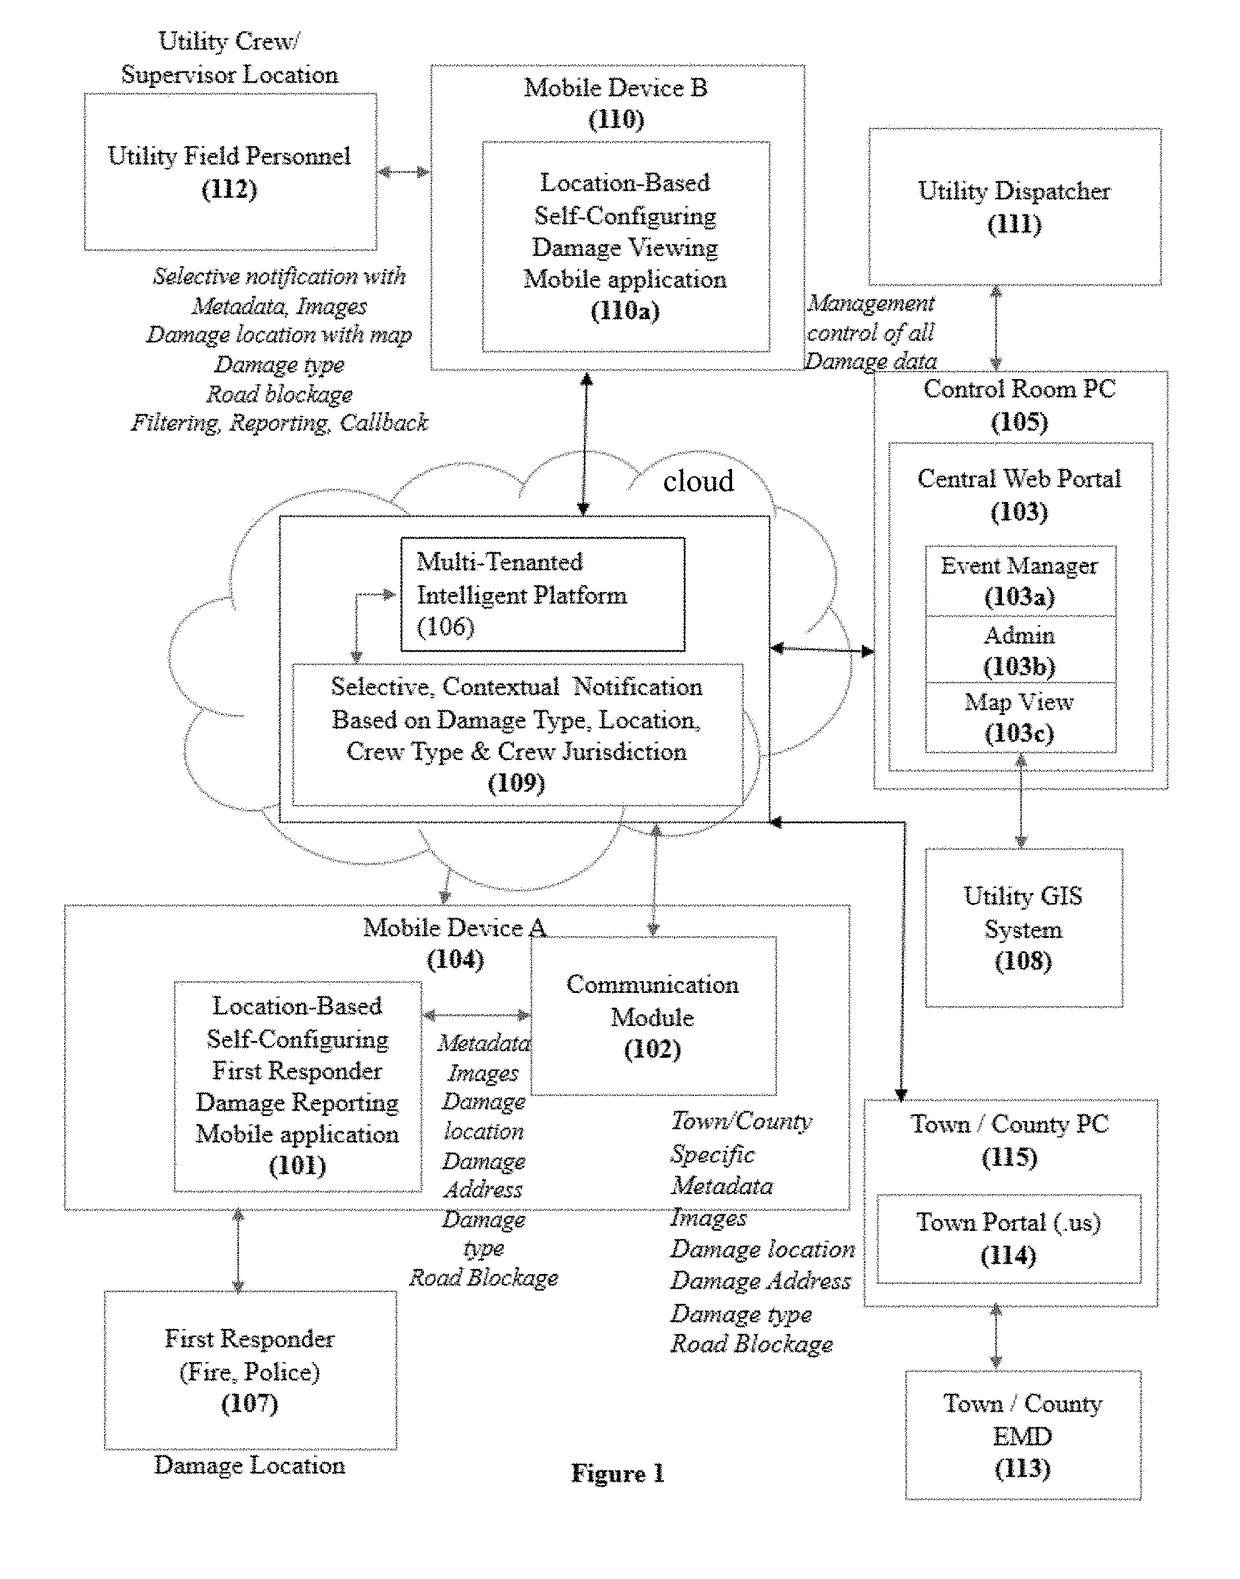 Self-customizing, multi-tenanted mobile system and method for digitally gathering and disseminating real-time visual intelligence on utility asset damage enabling automated priority analysis and enhanced utility outage response